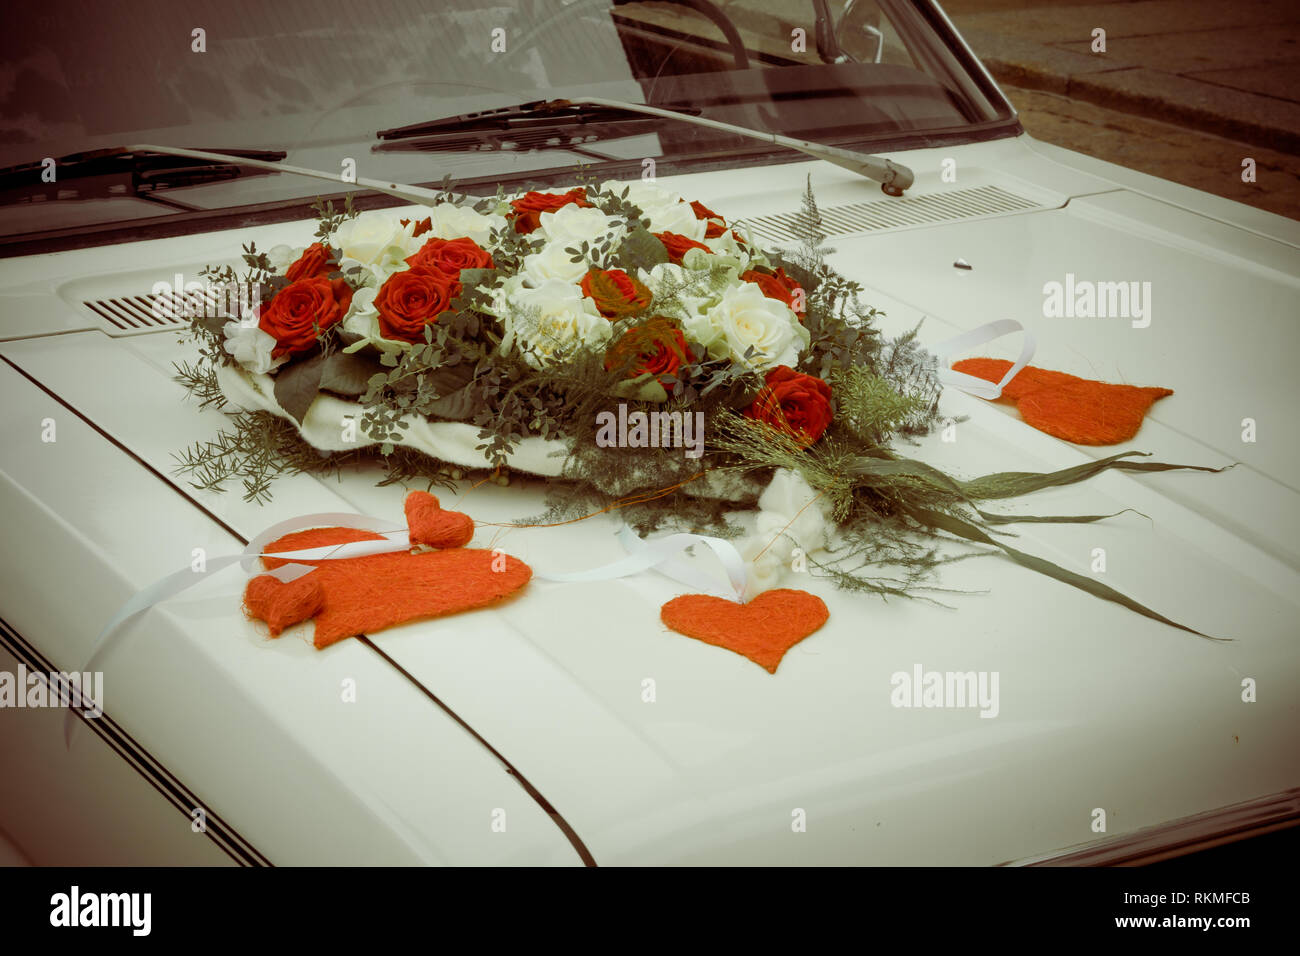 Car decoration for a wedding. Decorations on the car of the